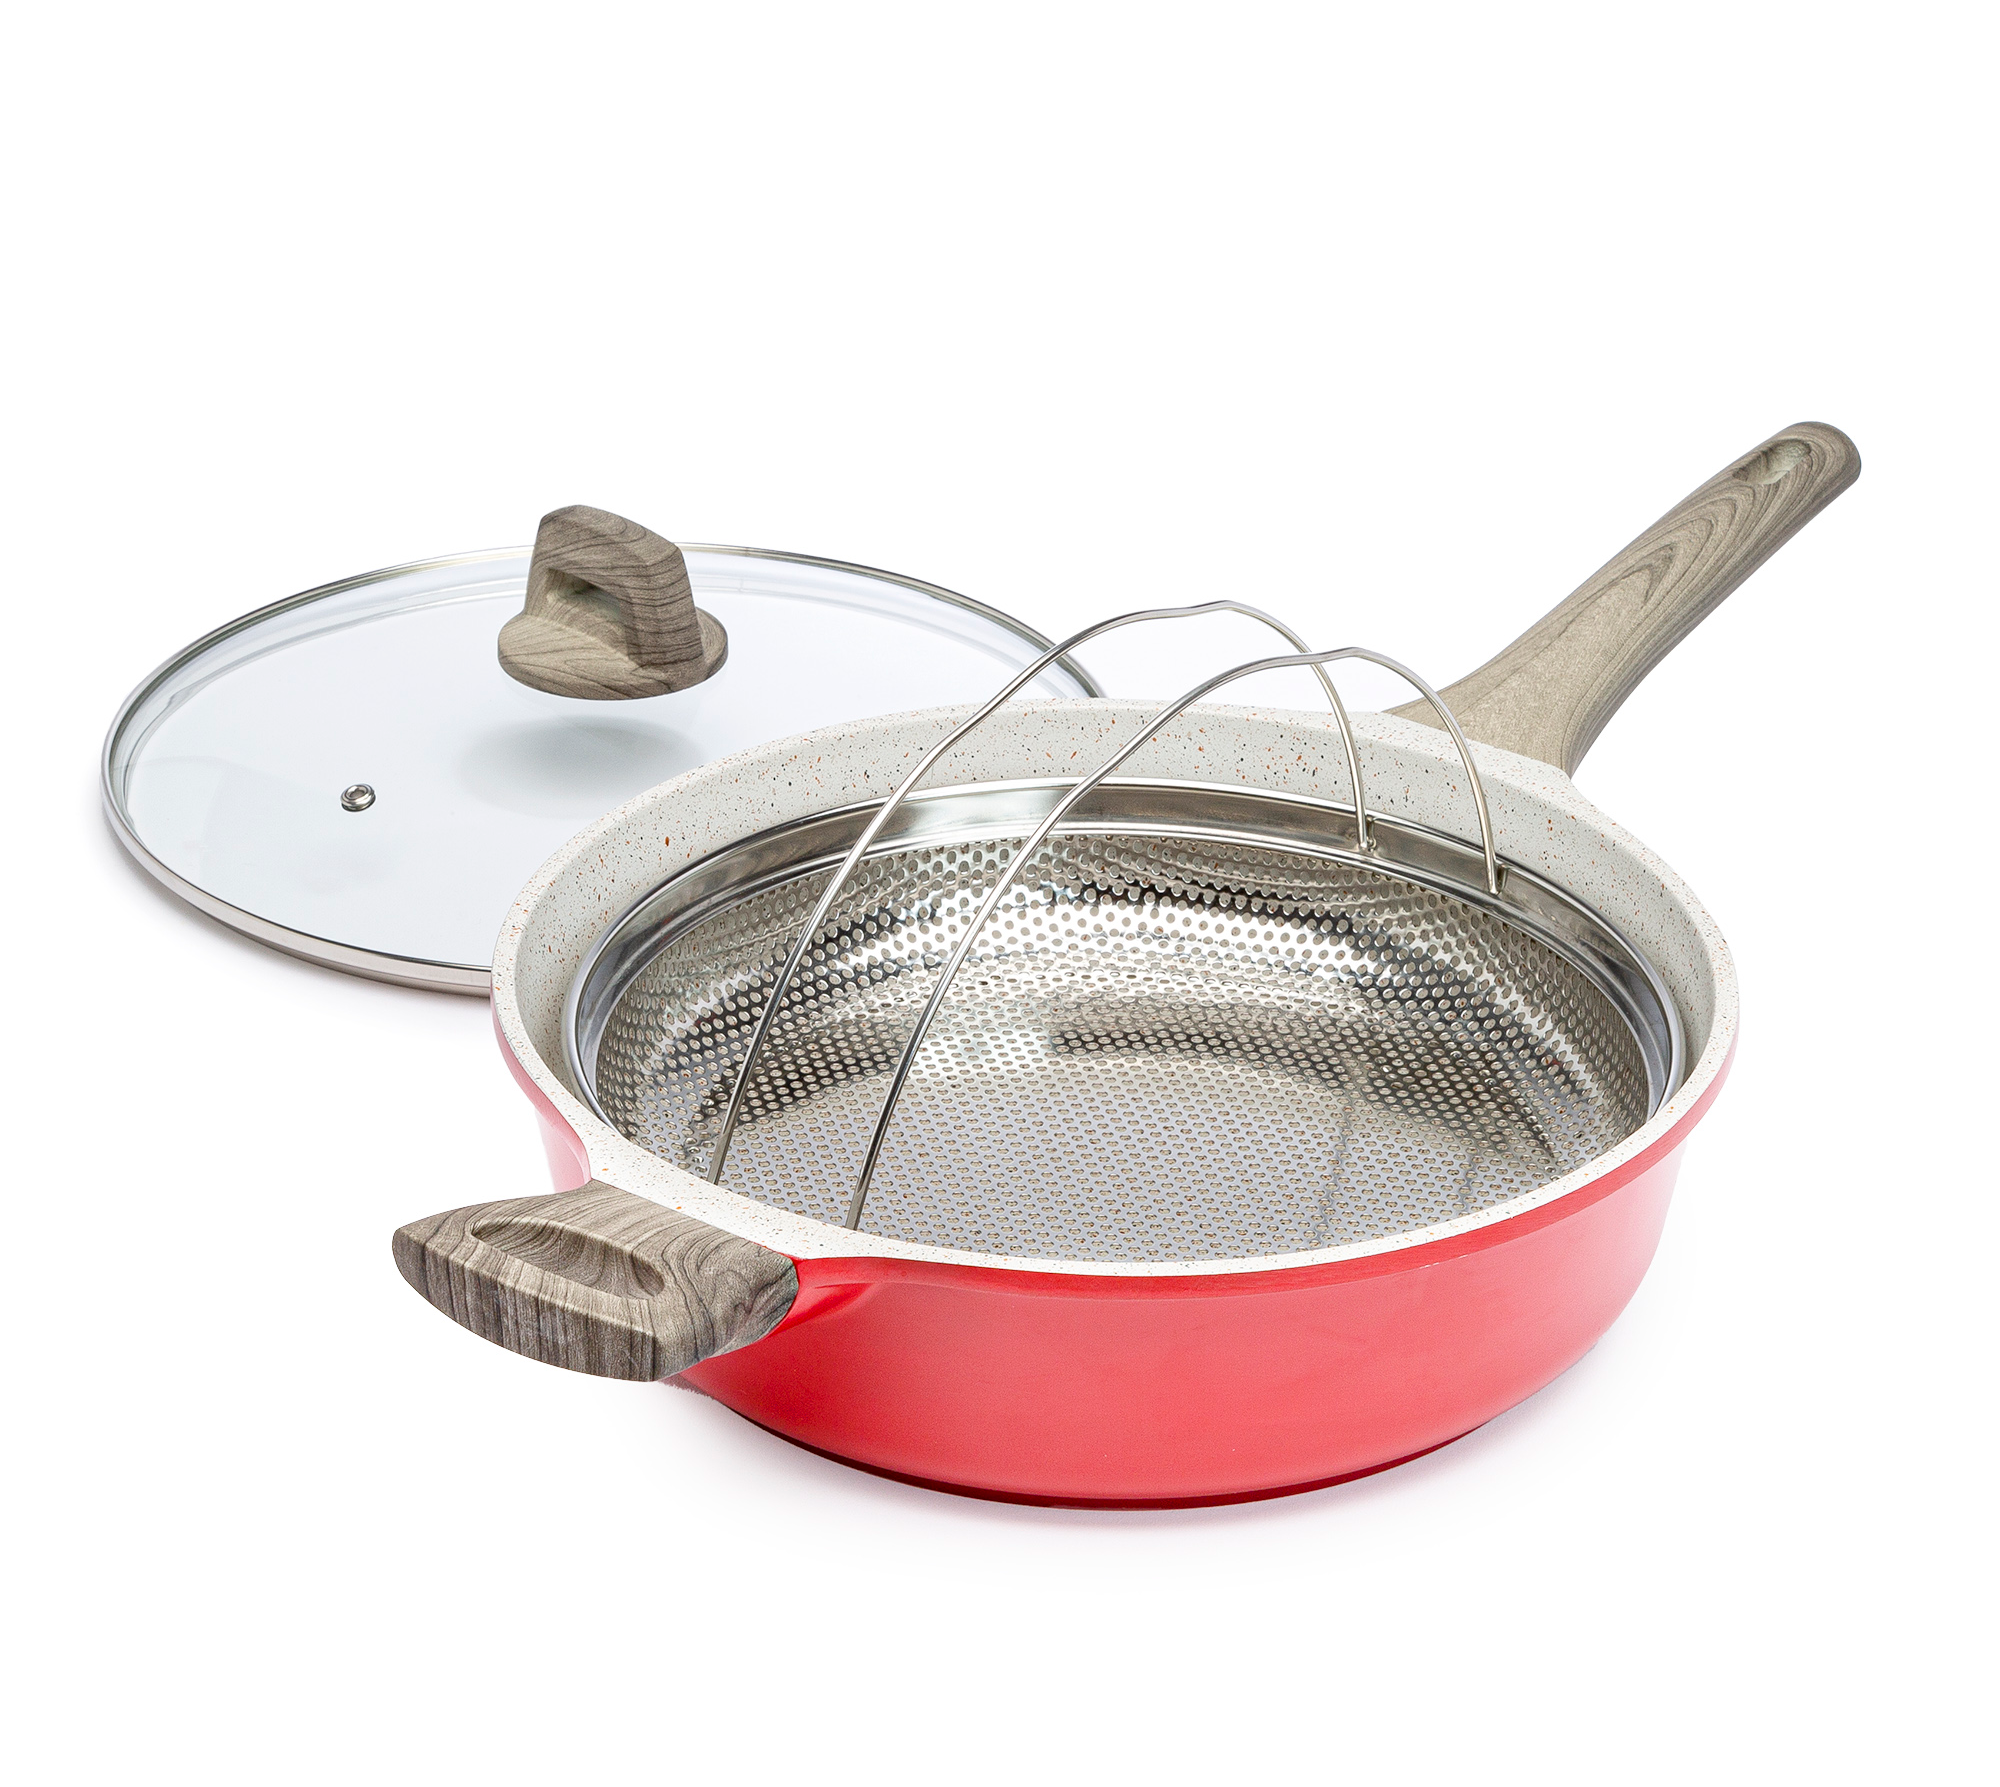 red pan with wood handles, clear lid, and a steamer basket with handle